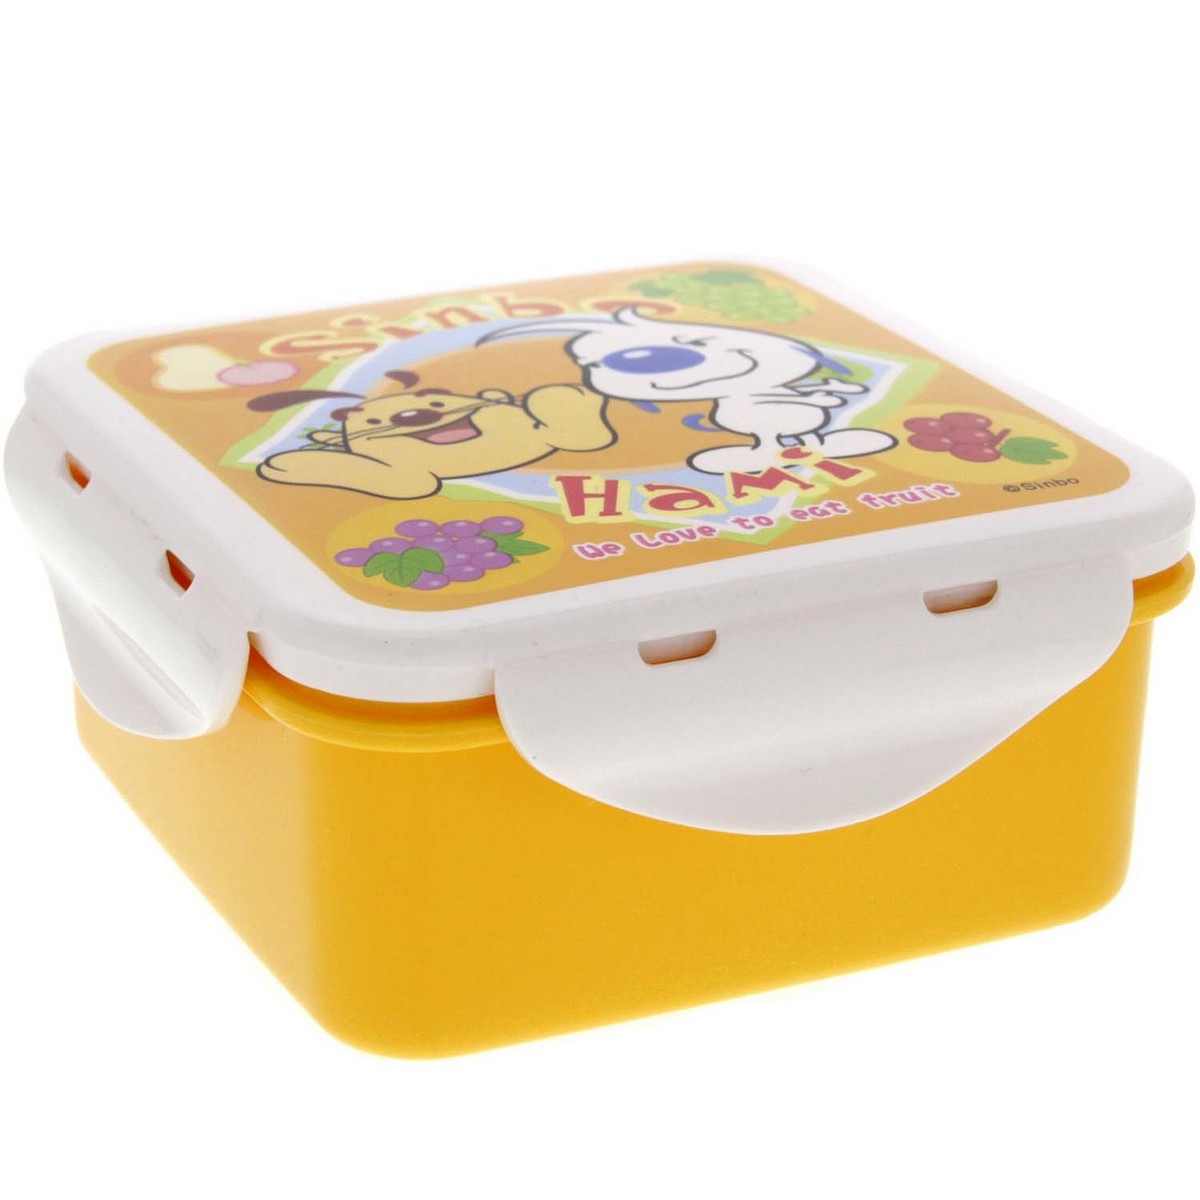 Sinbo&Hami 4Side Lock Lunch Box Assorted Colors ZP022A